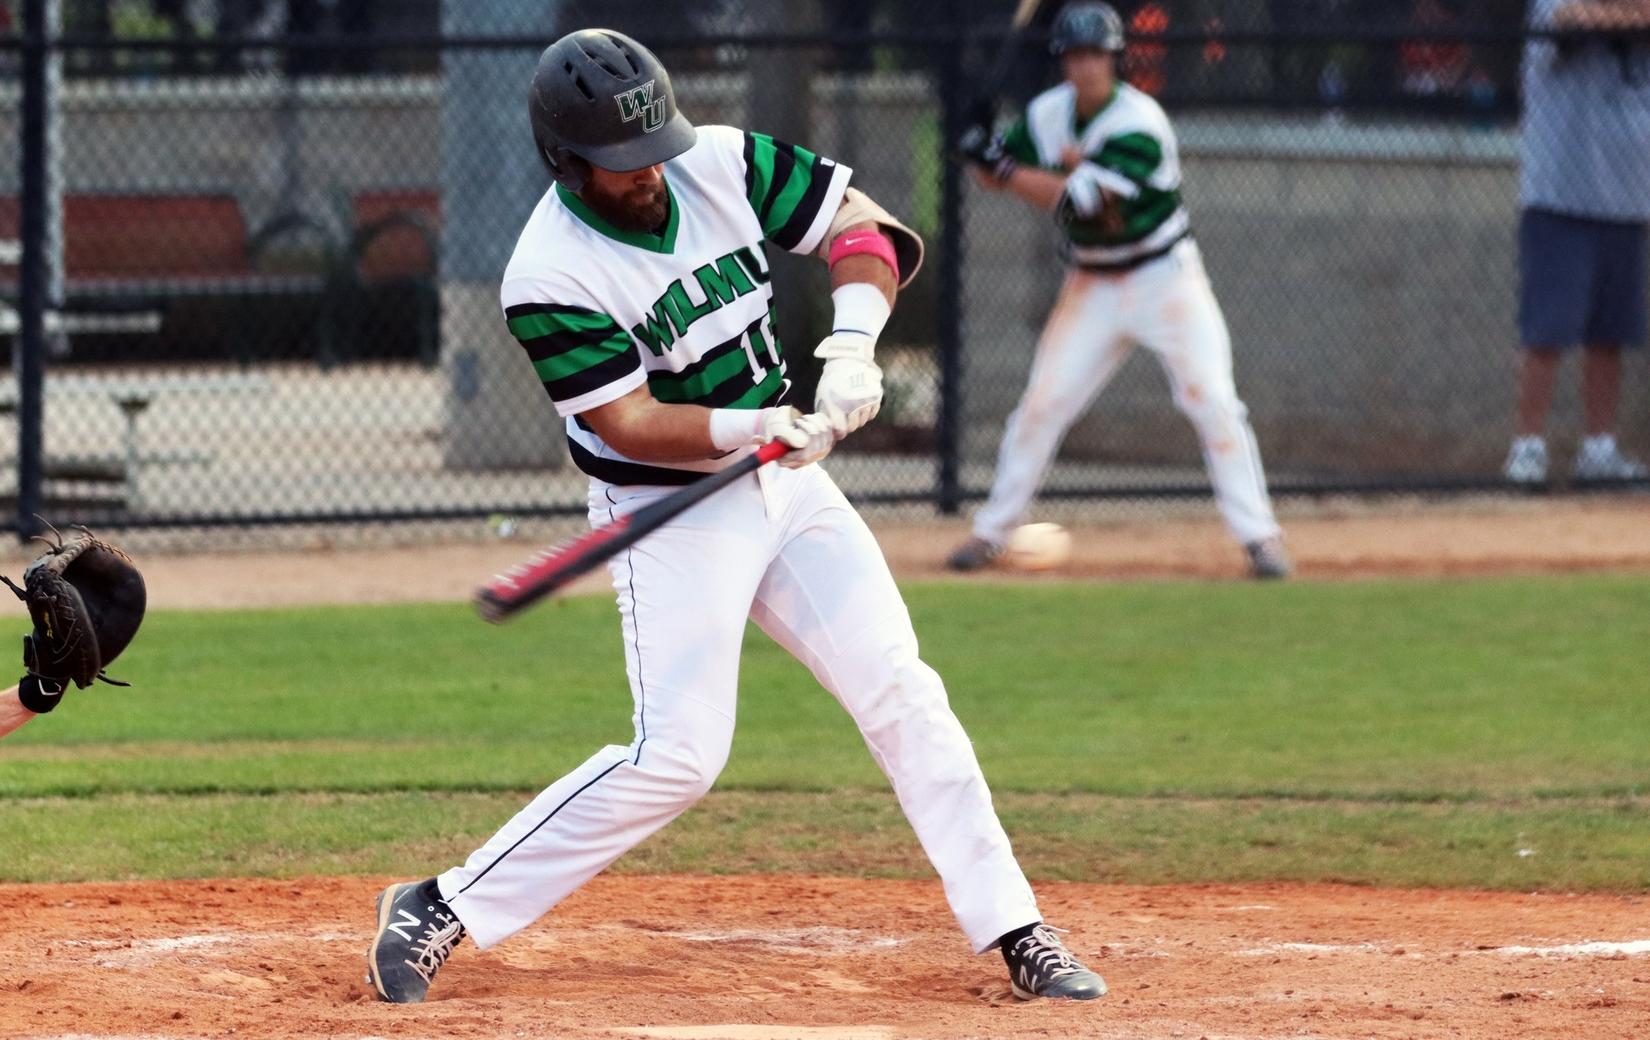 File photo of Brooks Ryan who went 4-for-5 at Shippensburg. Copyright 2020; Wilmington University. All rights reserved. Photo by Dan Lauletta. March 5, 2020 vs. St. Cloud State at Lake Myrtle Sports Complex in Auburndale, Fla.